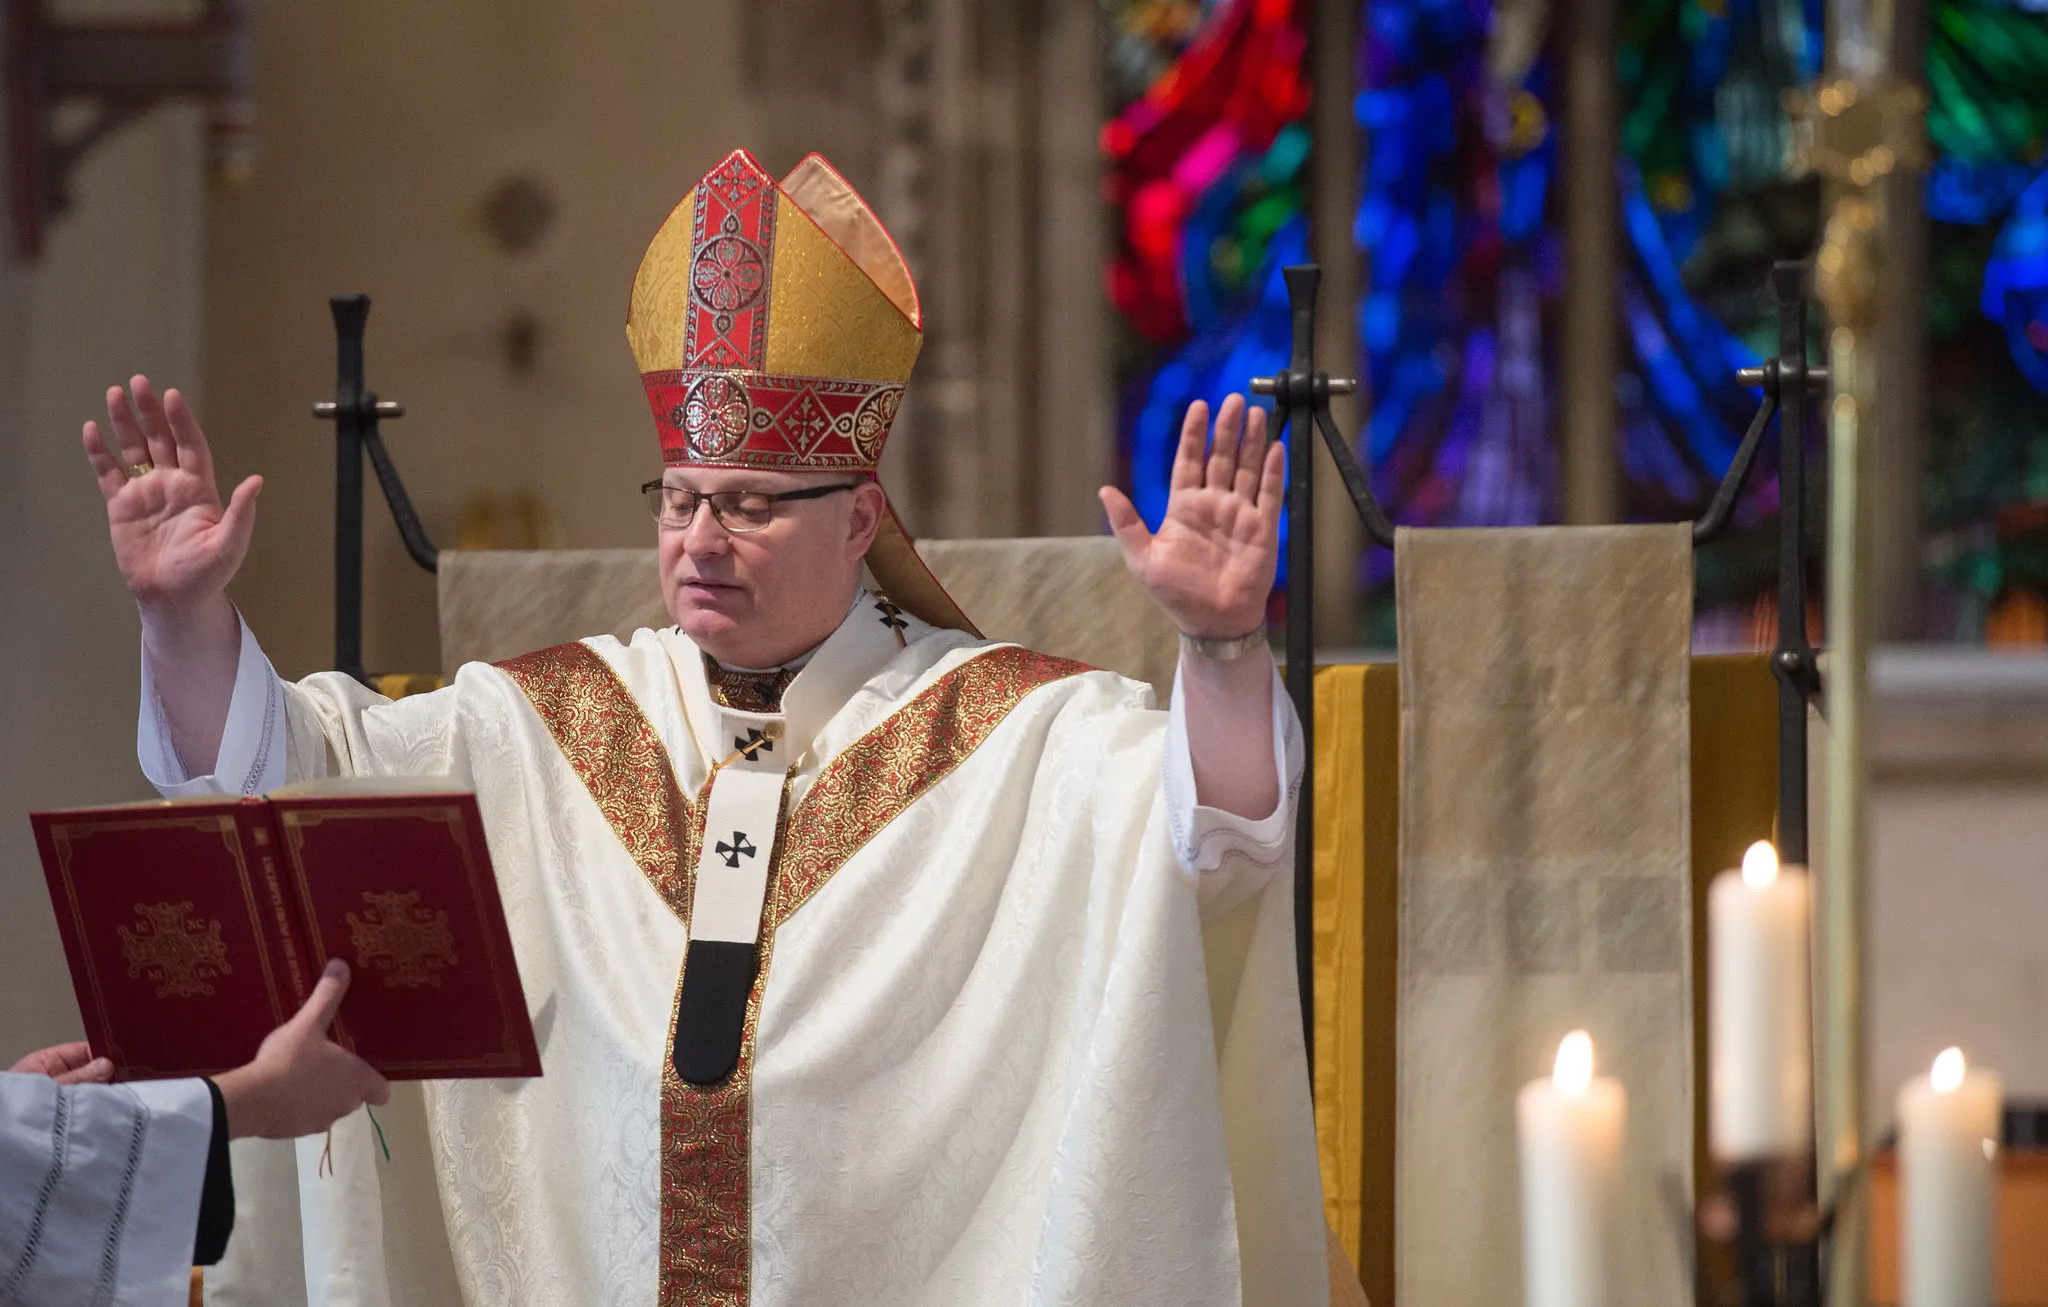 Archbishop John Wilson of Southwark says Mass at St. George's Cathedral, Southwark. ?w=200&h=150